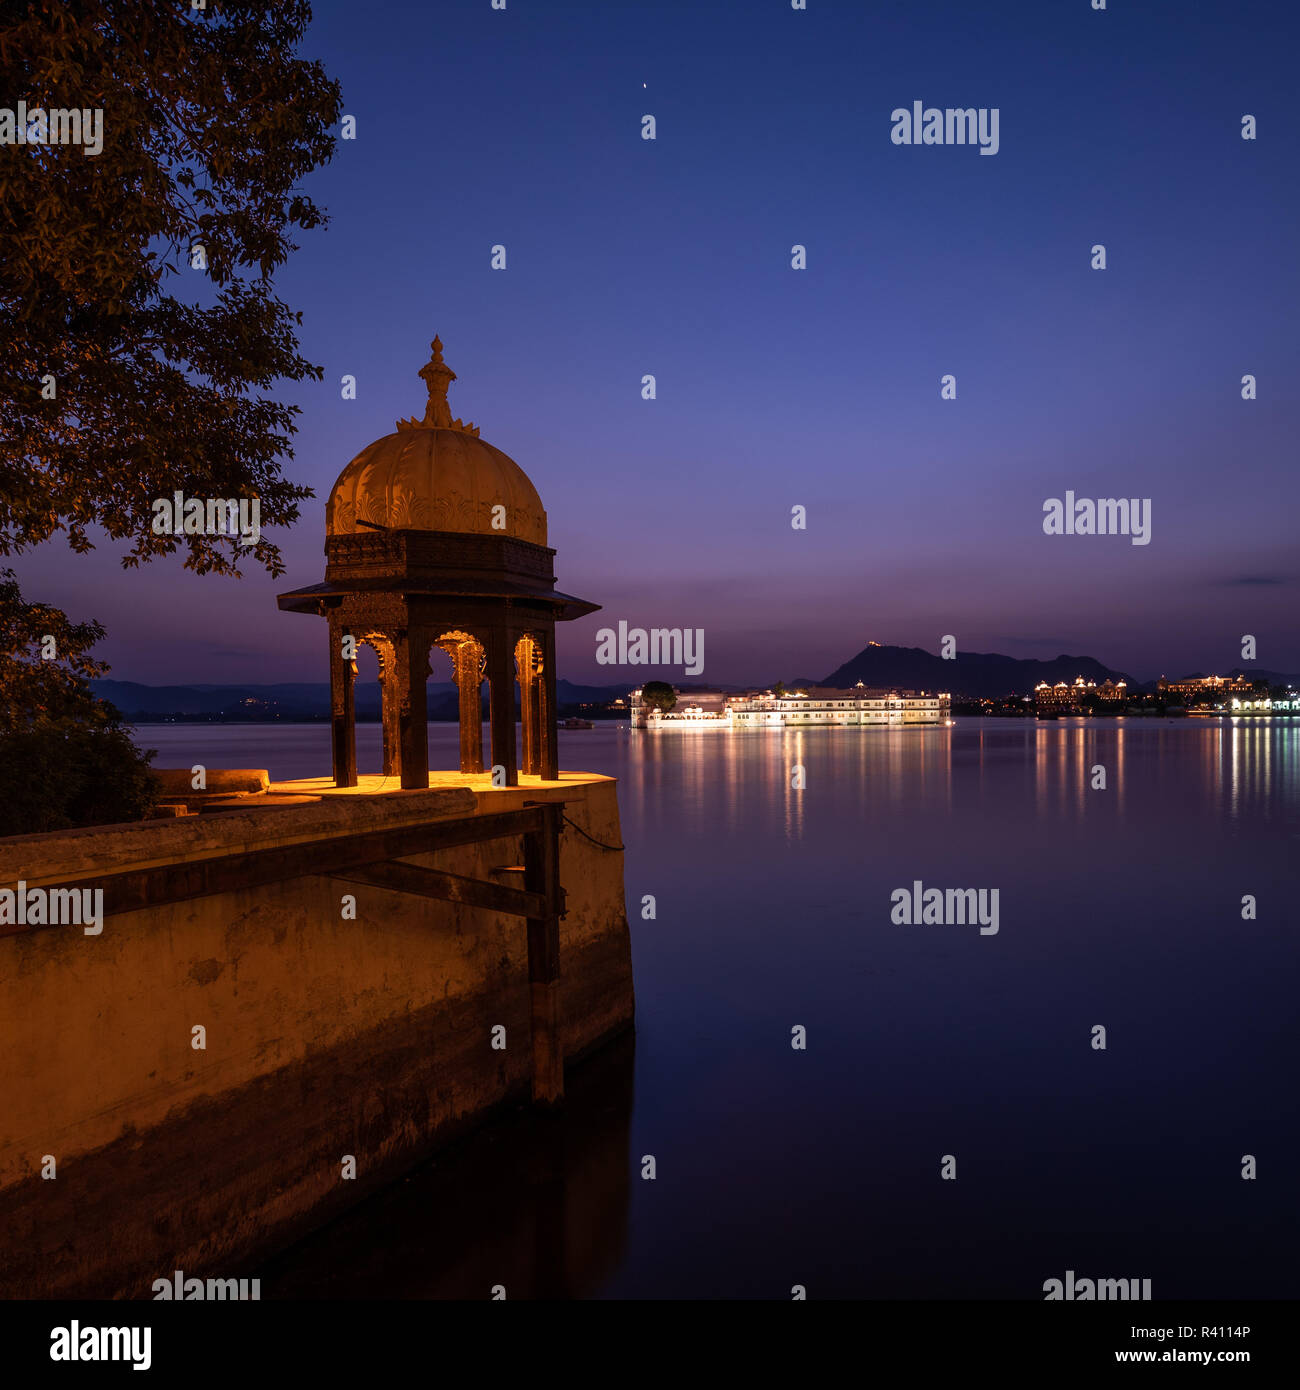 An ornate Chhatri or Canopy typical of Rajasthani architecture at night with Lake Pichola in the background. Stock Photo